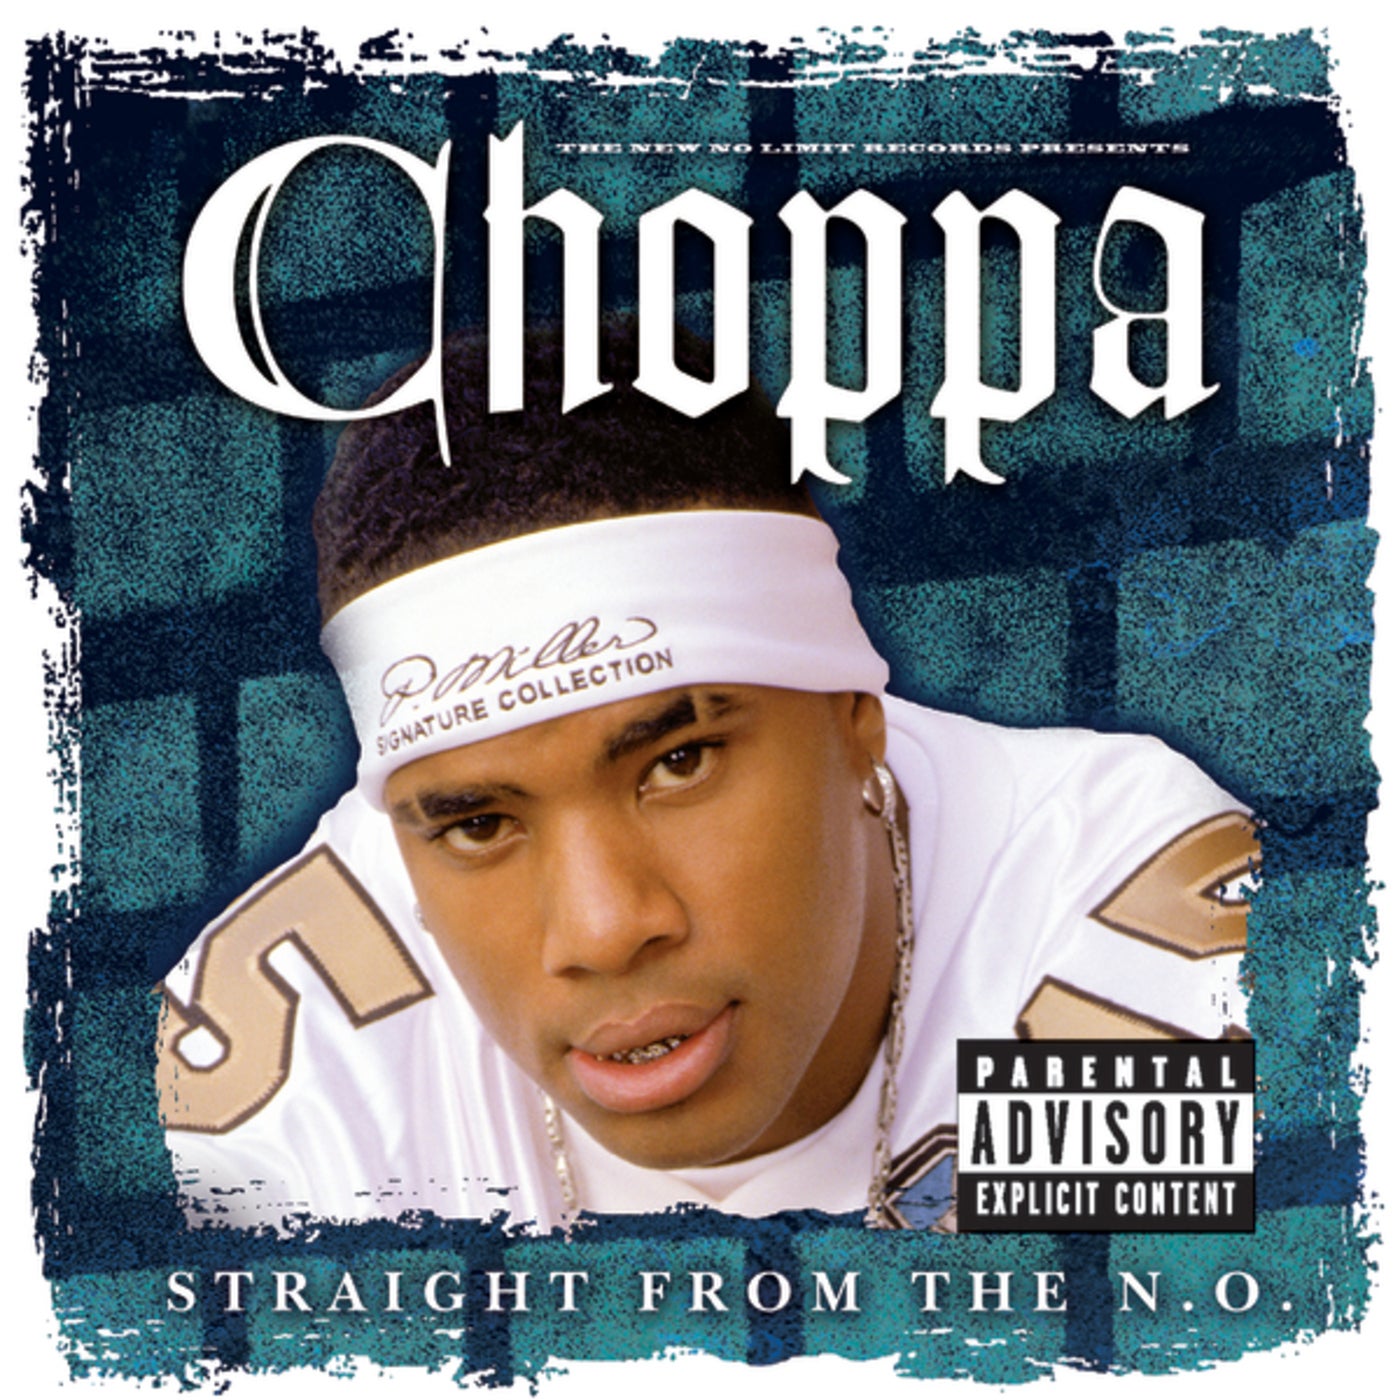 Straight From the N.O. by Choppa Style